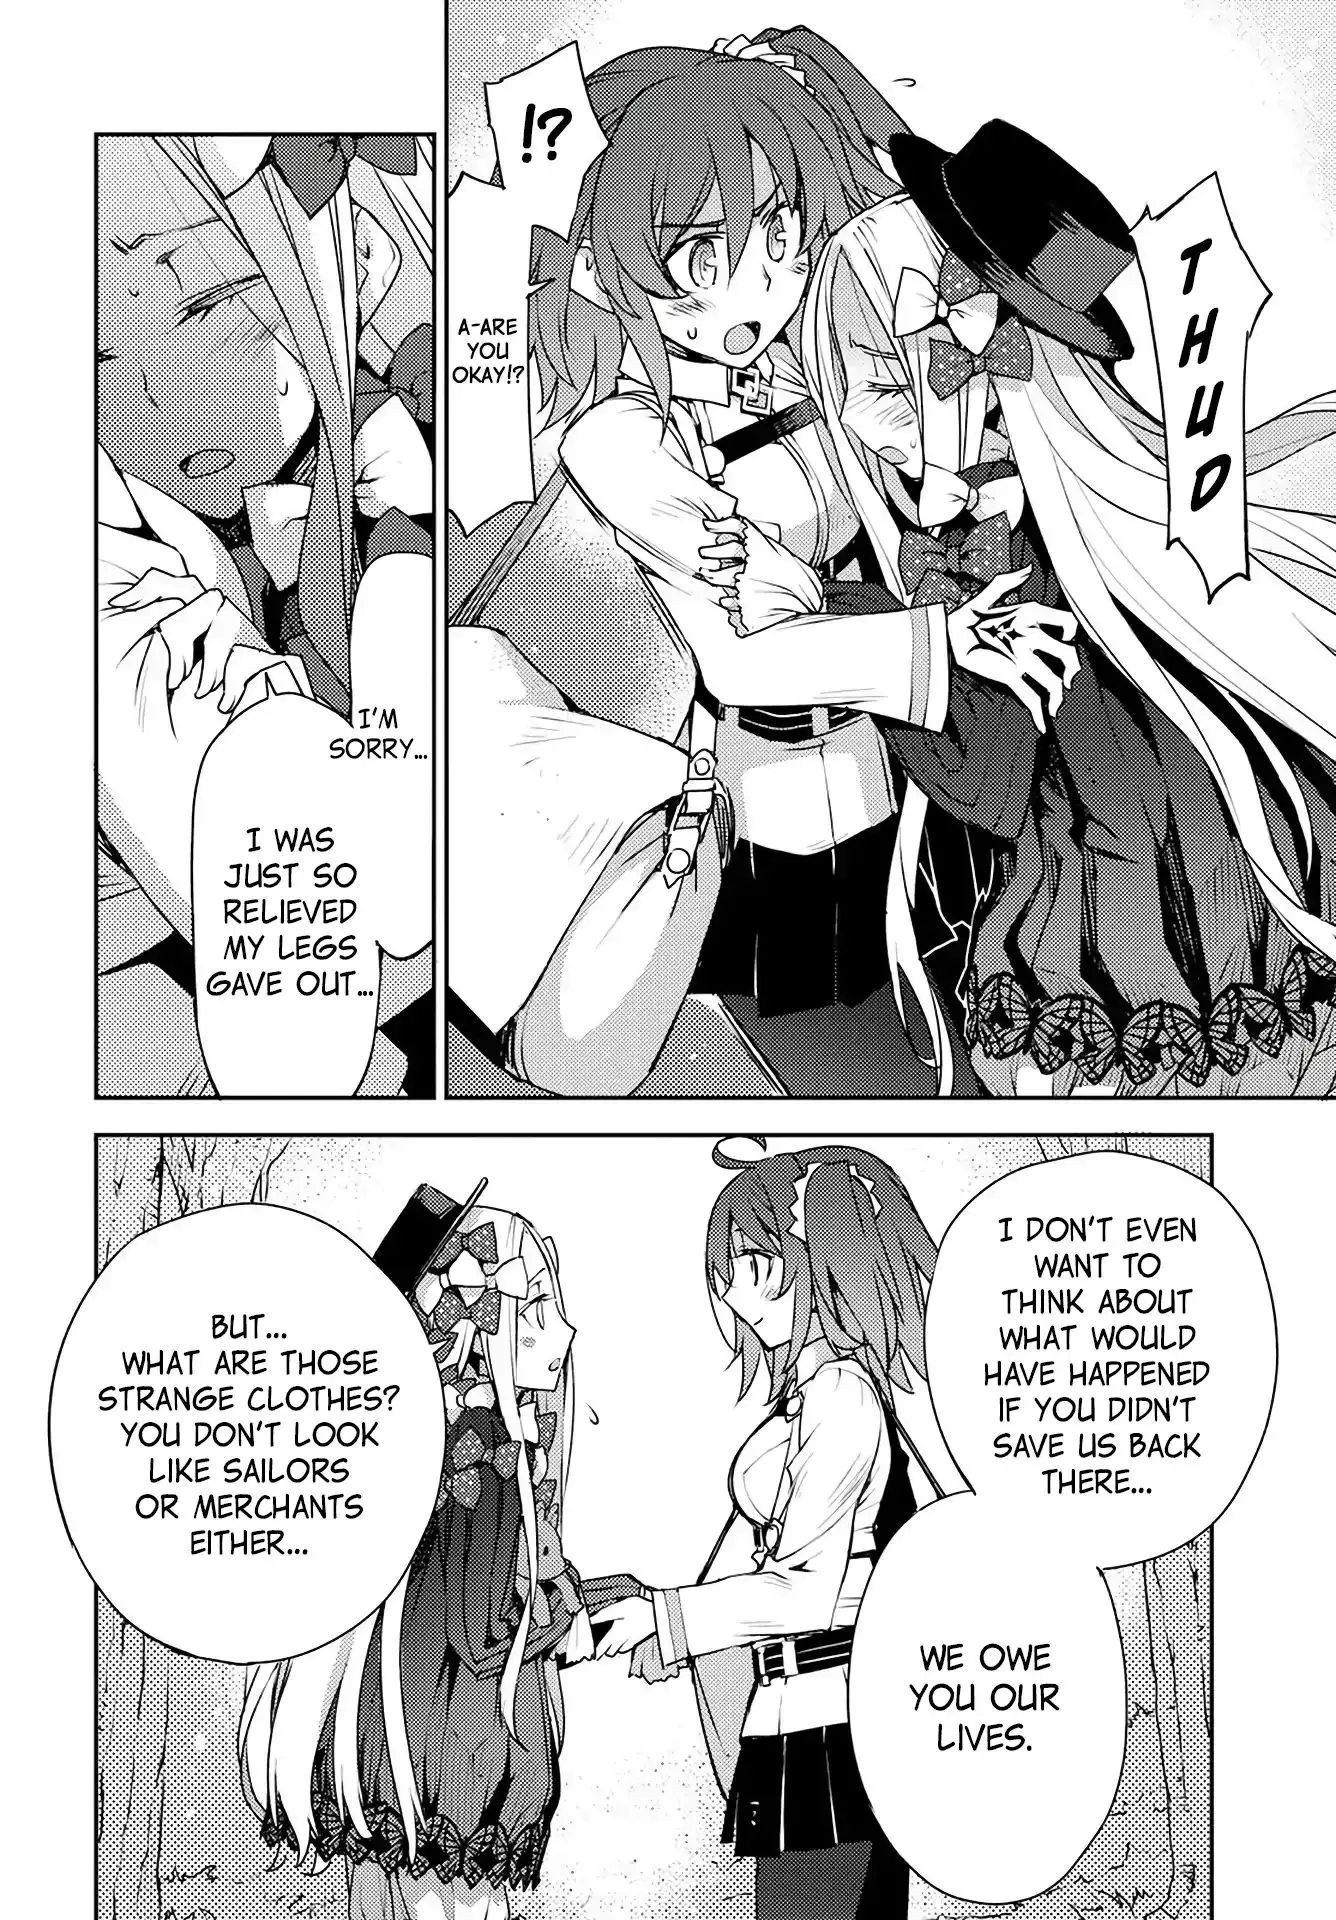 Fate/grand Order: Epic Of Remnant - Subspecies Singularity Iv: Taboo Advent Salem: Salem Of Heresy - 3 page 8